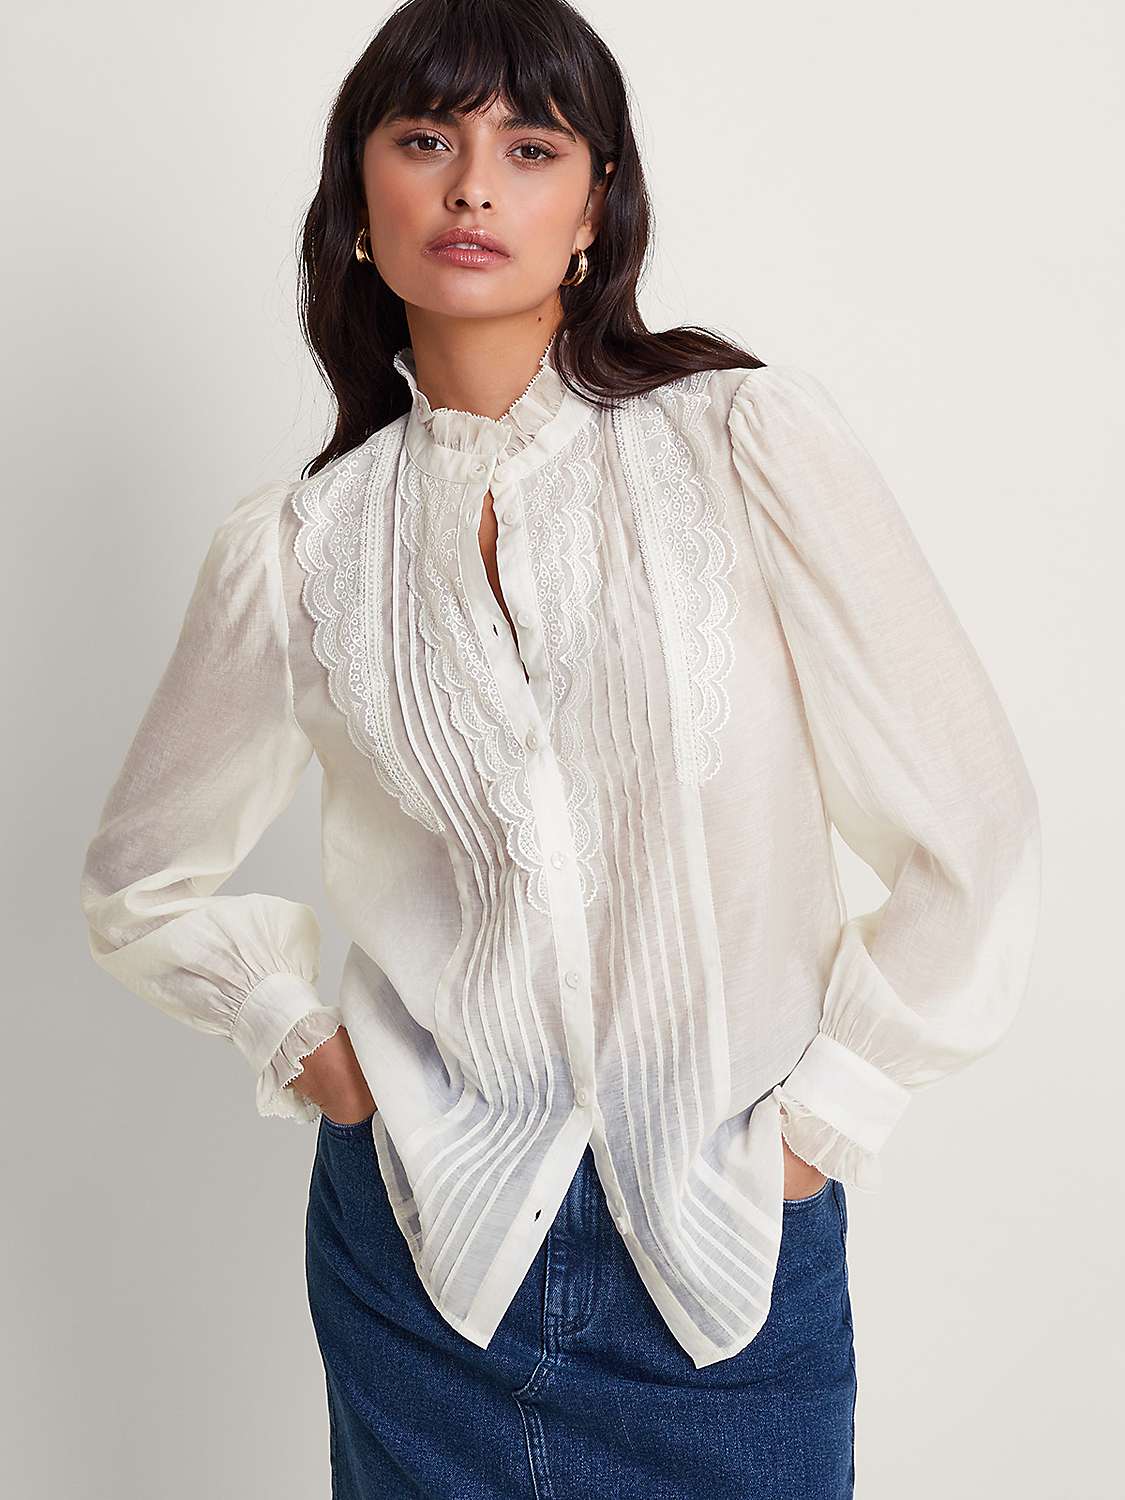 Buy Monsoon Lena Lace Blouse, Ivory Online at johnlewis.com